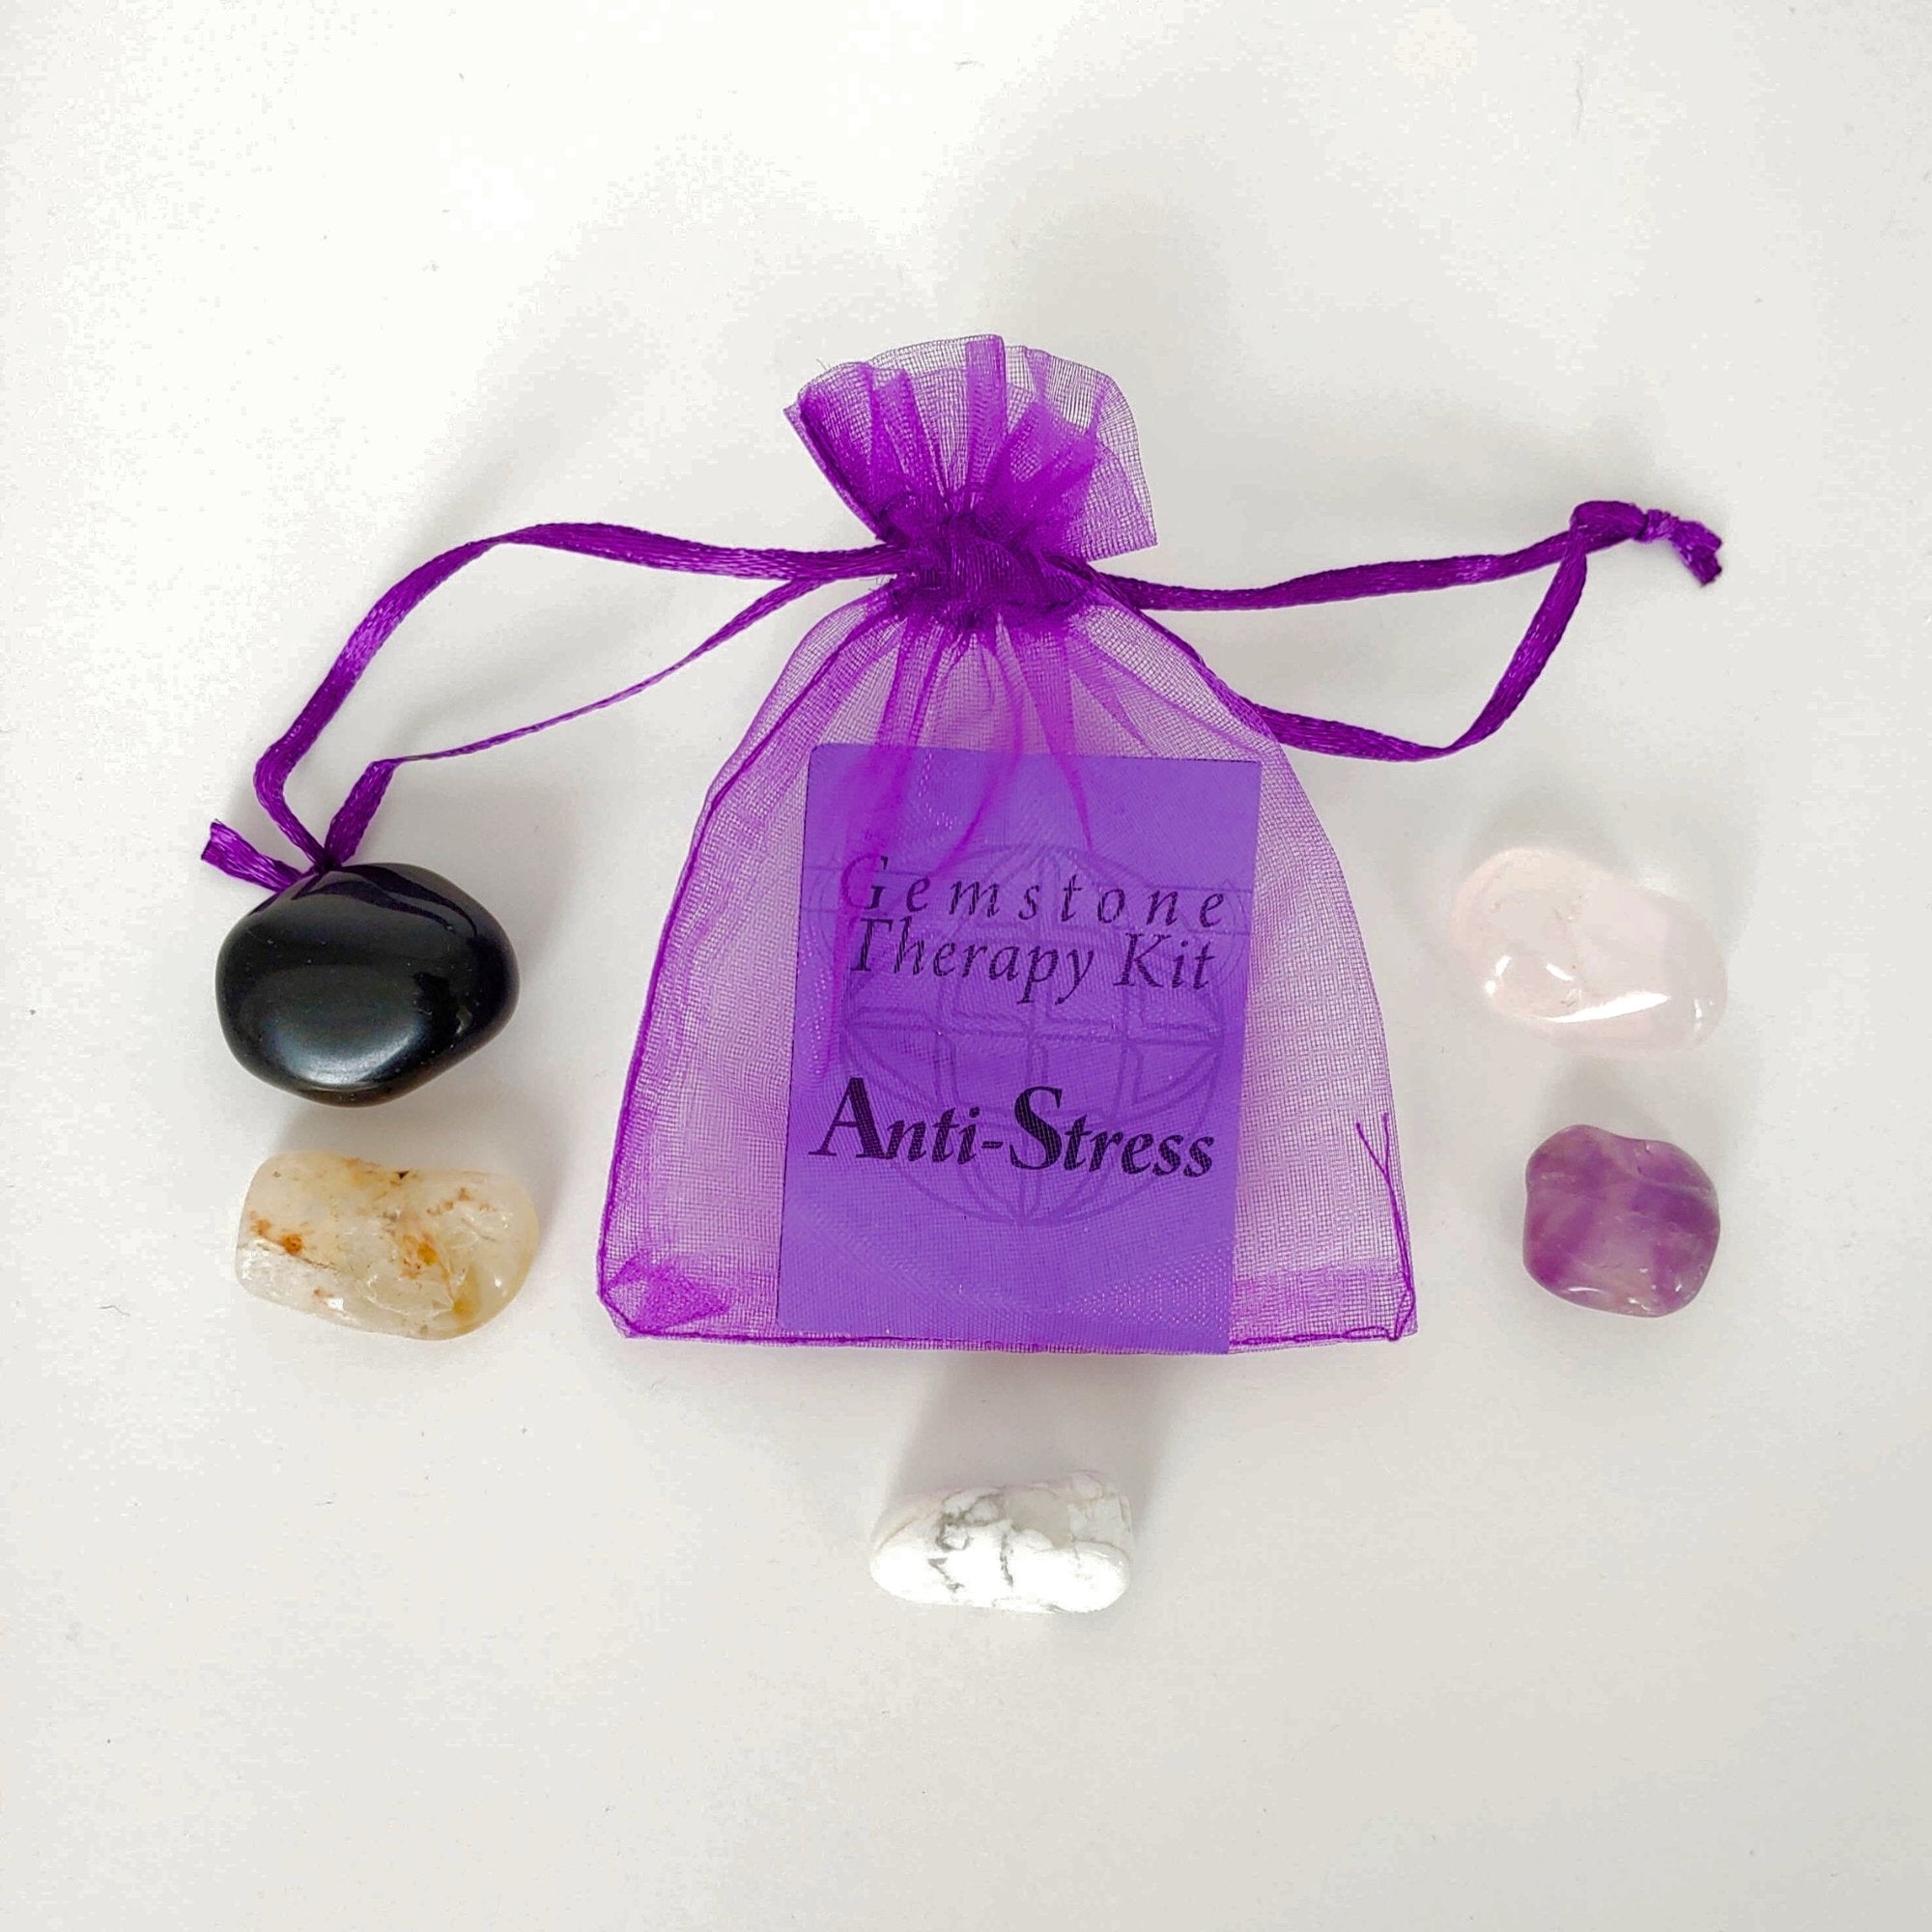 Crystals for Anxiety and Sleep  Anti-Stress Gemstone Therapy Kit